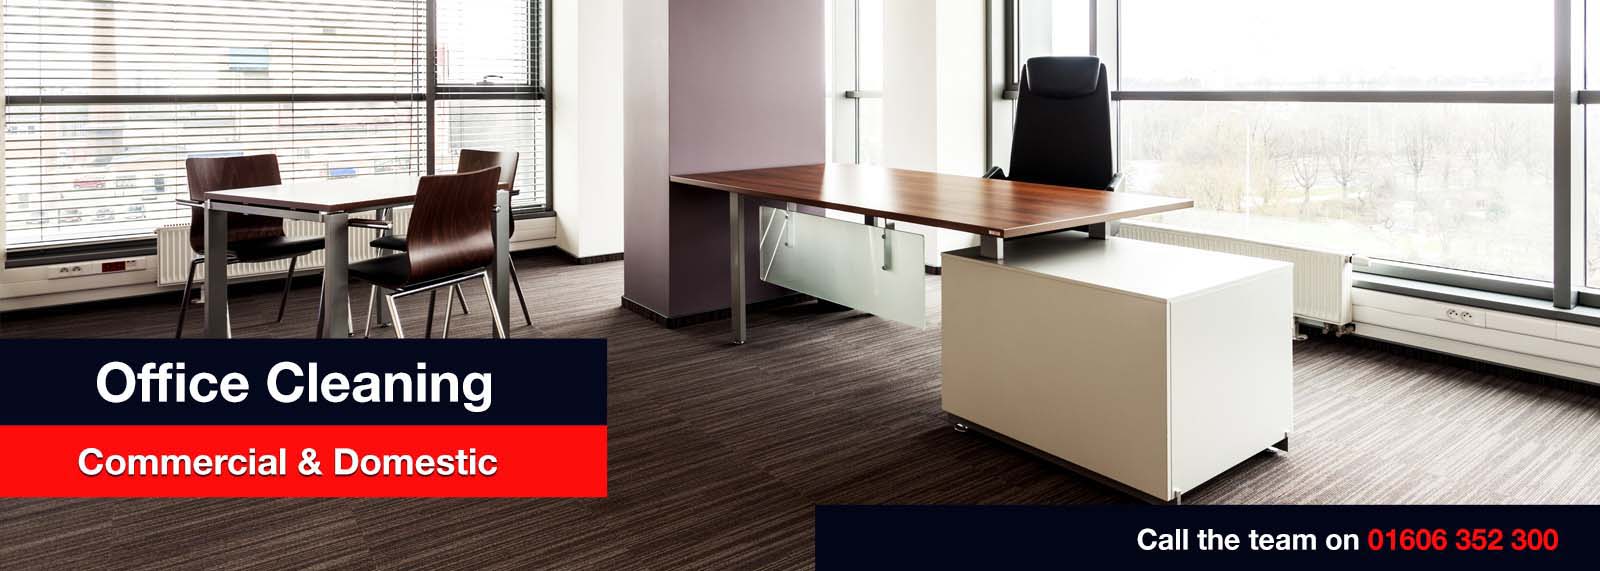 Office Cleaning Services in Cheshire